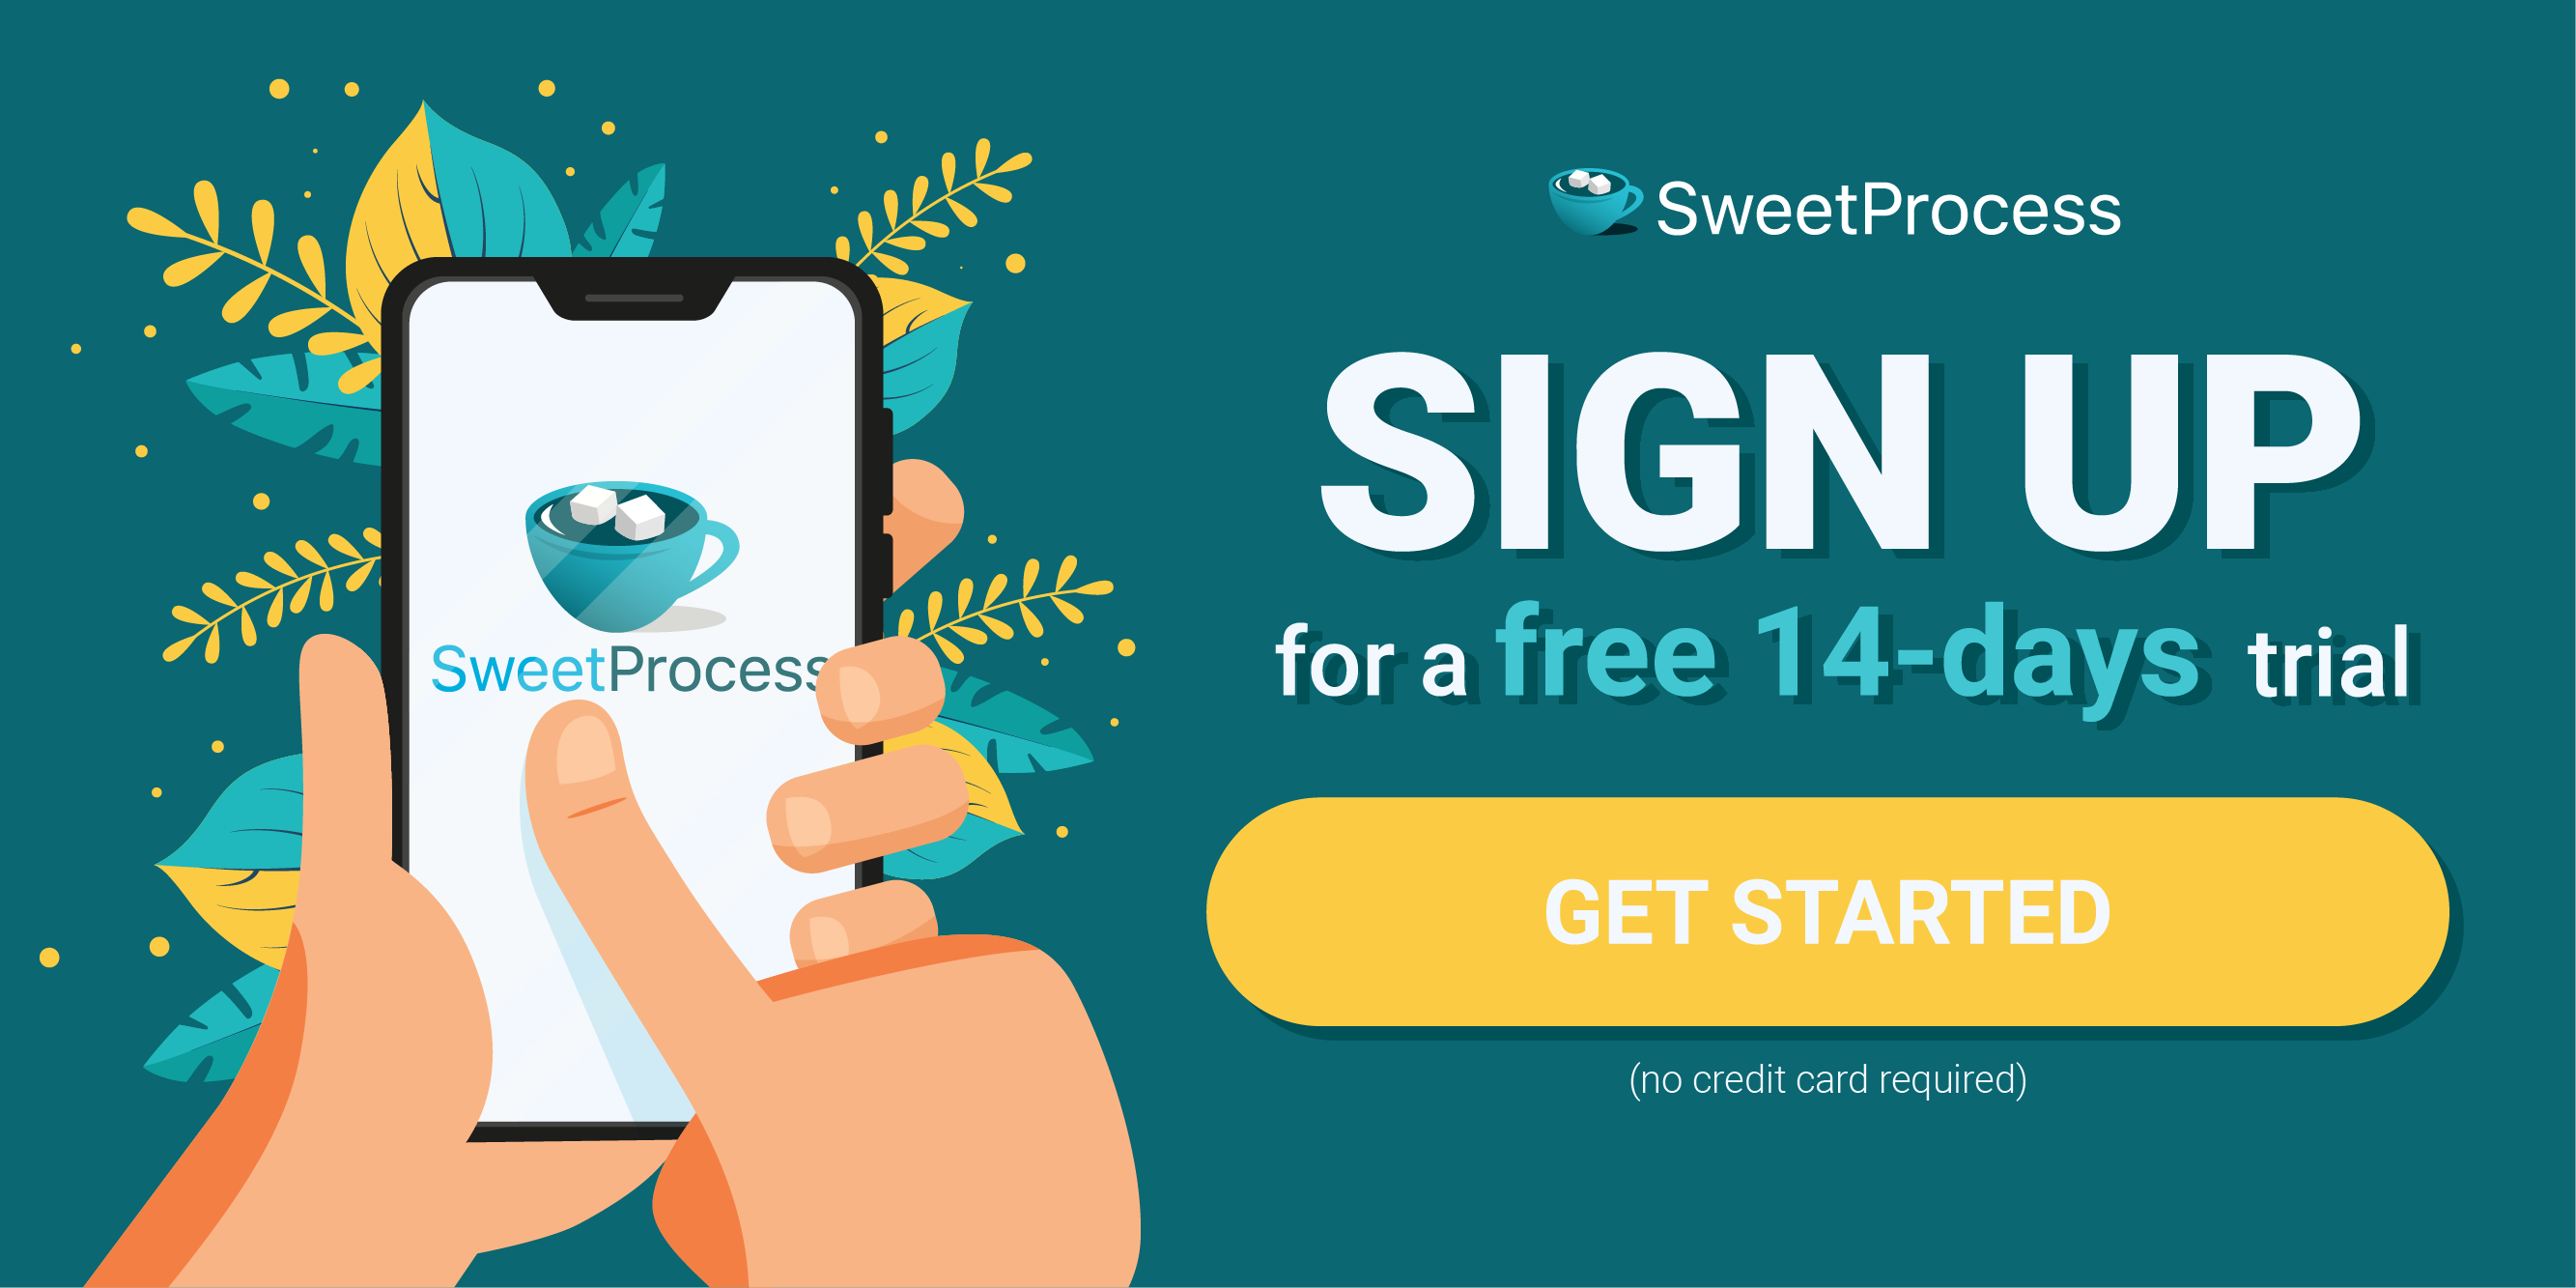 sign up for a 14 day free trial of SweetProcess